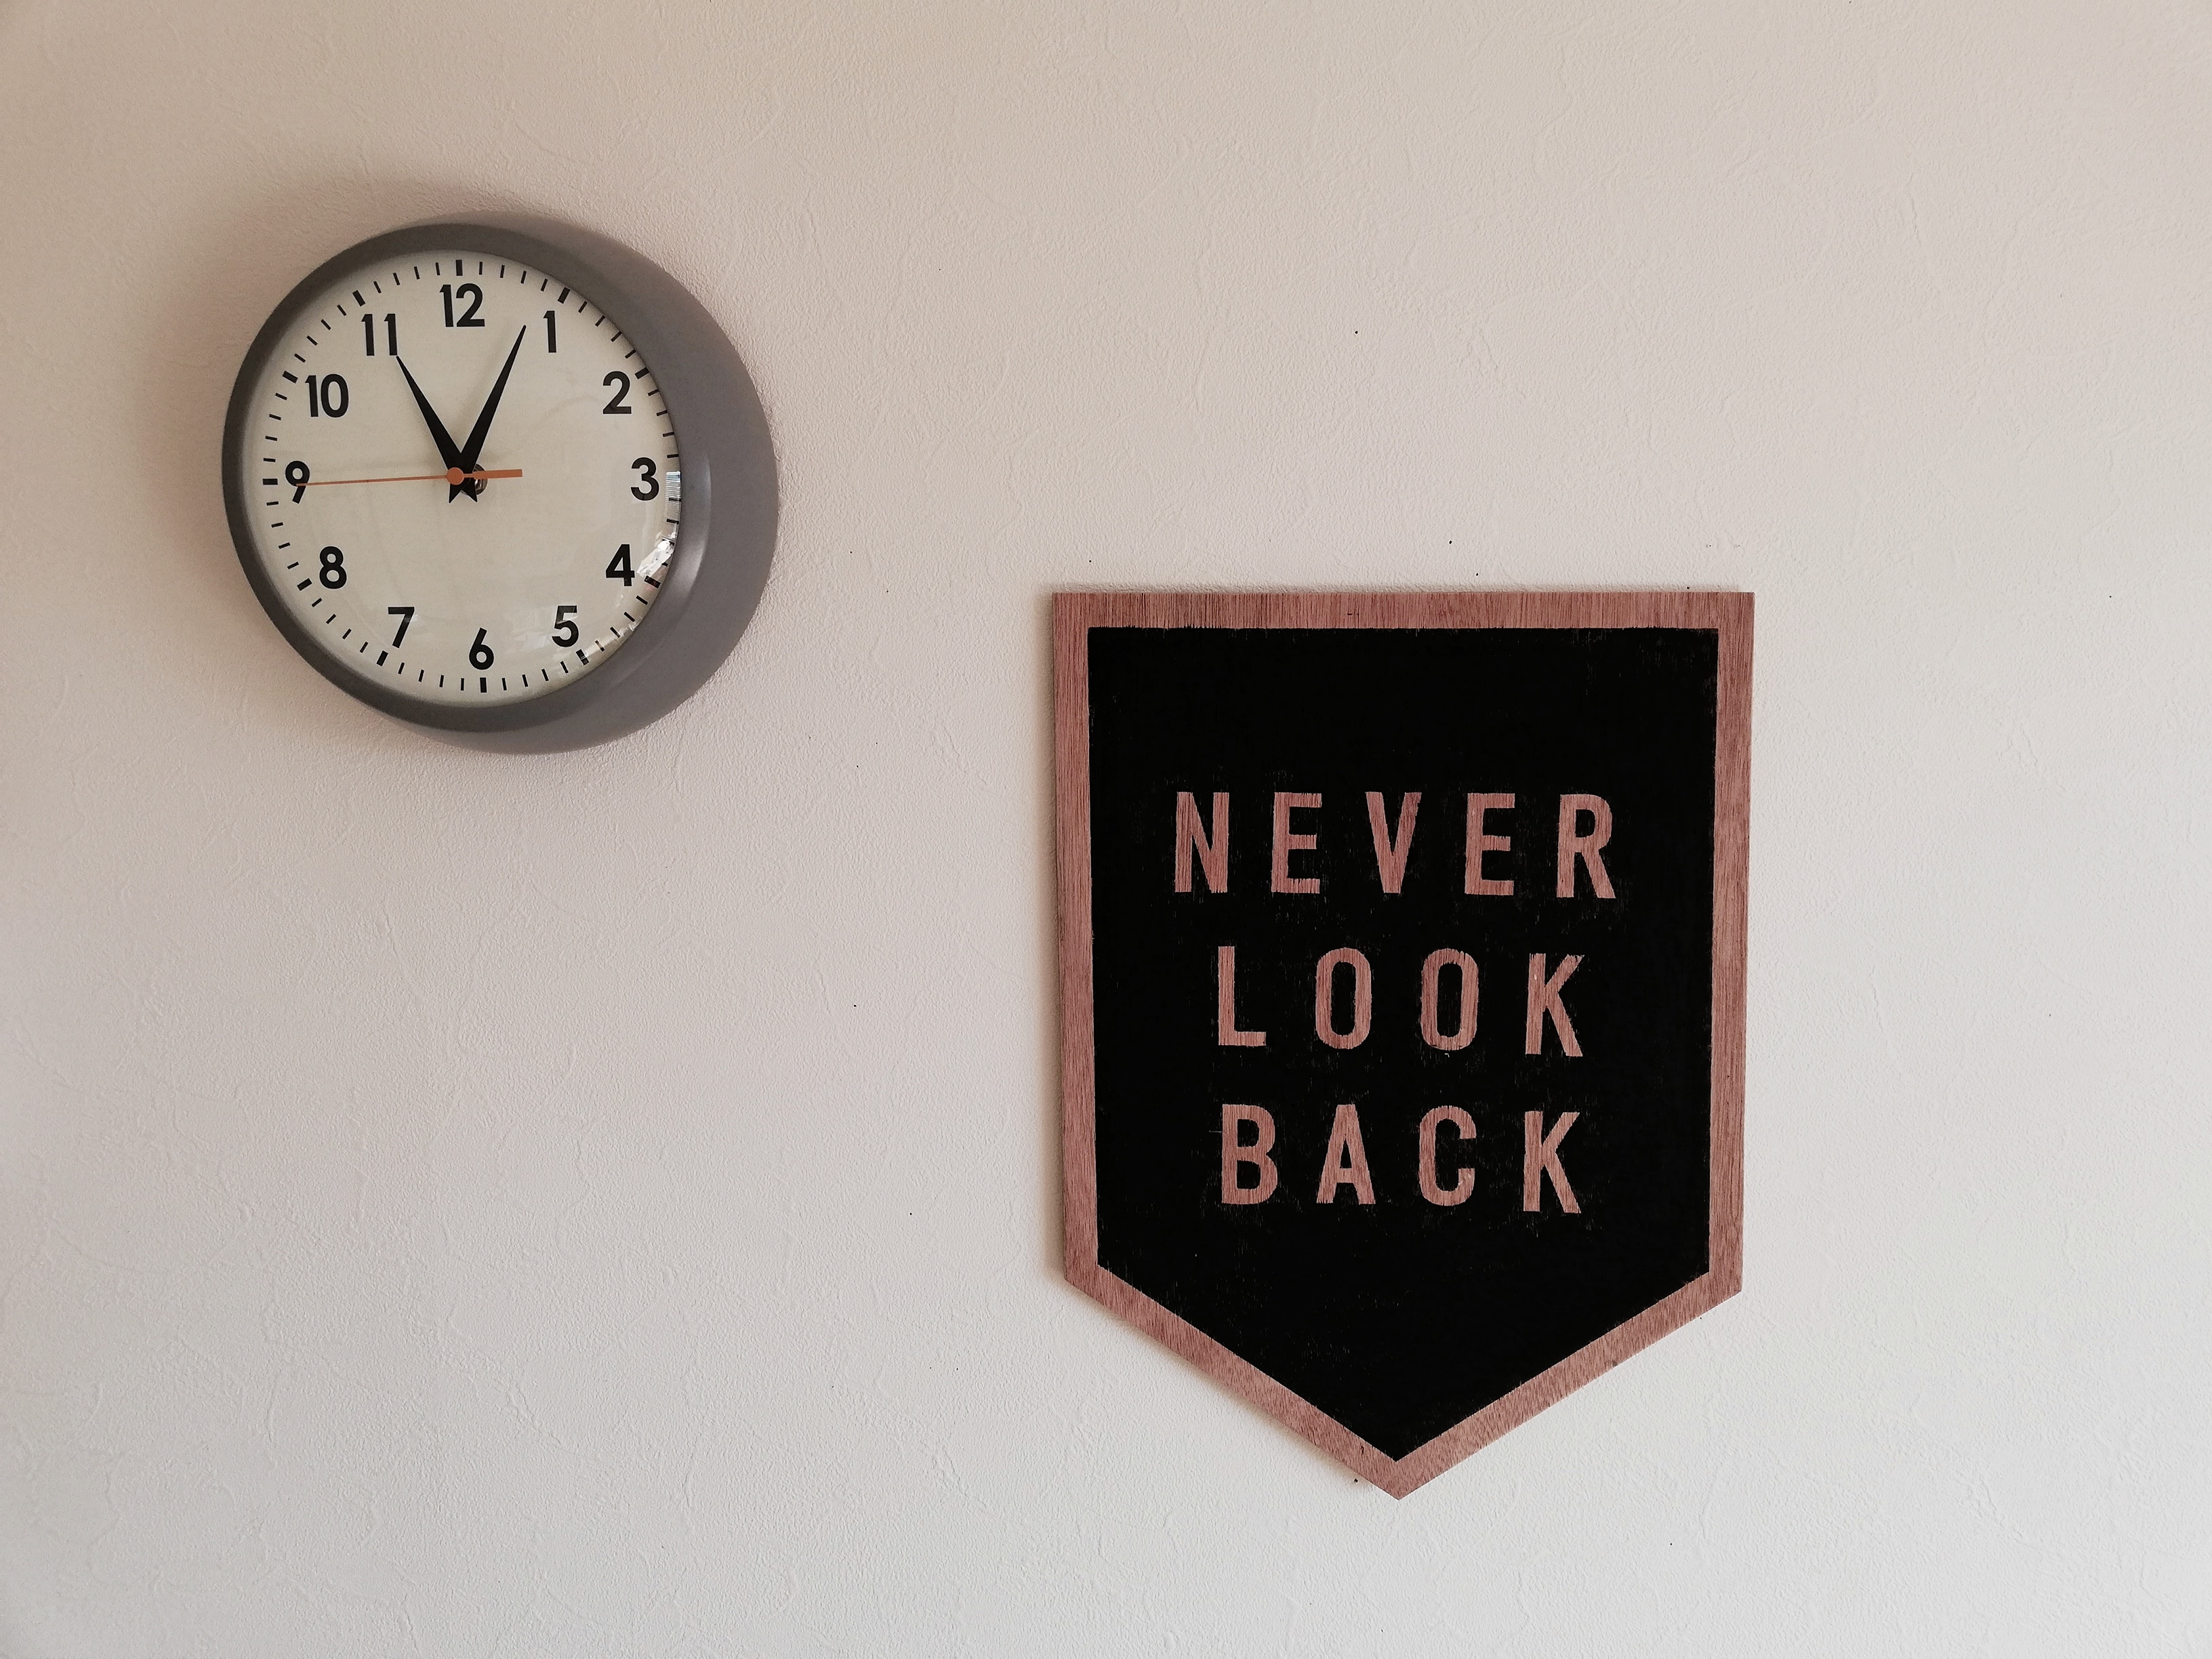 NEVER LOOK BACK !!